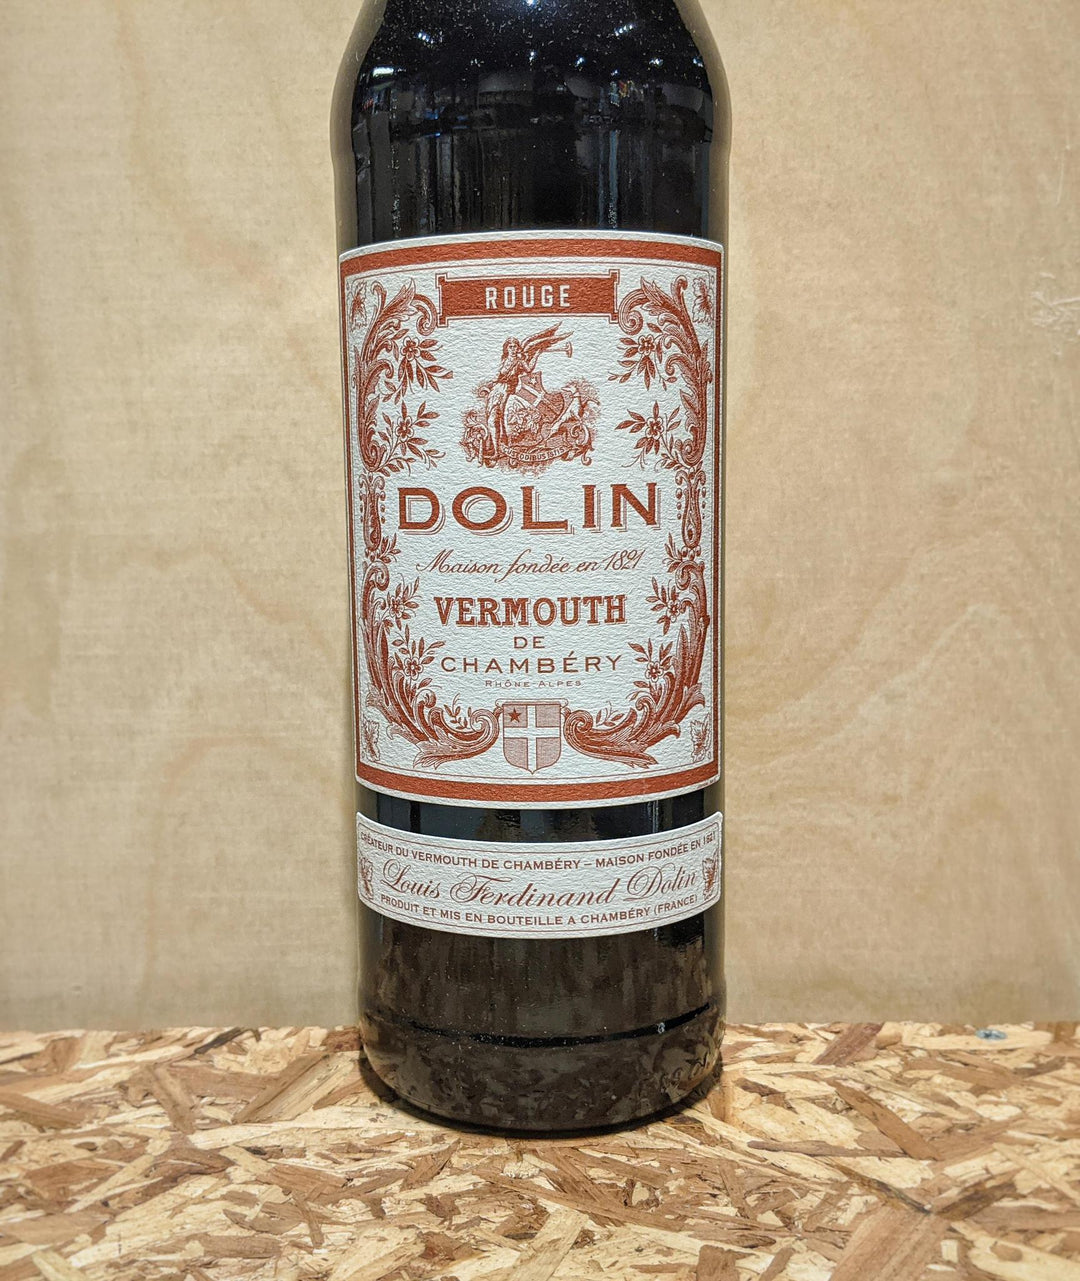 Dolin Rouge Vermouth de Chambery NV (Savoie, France)